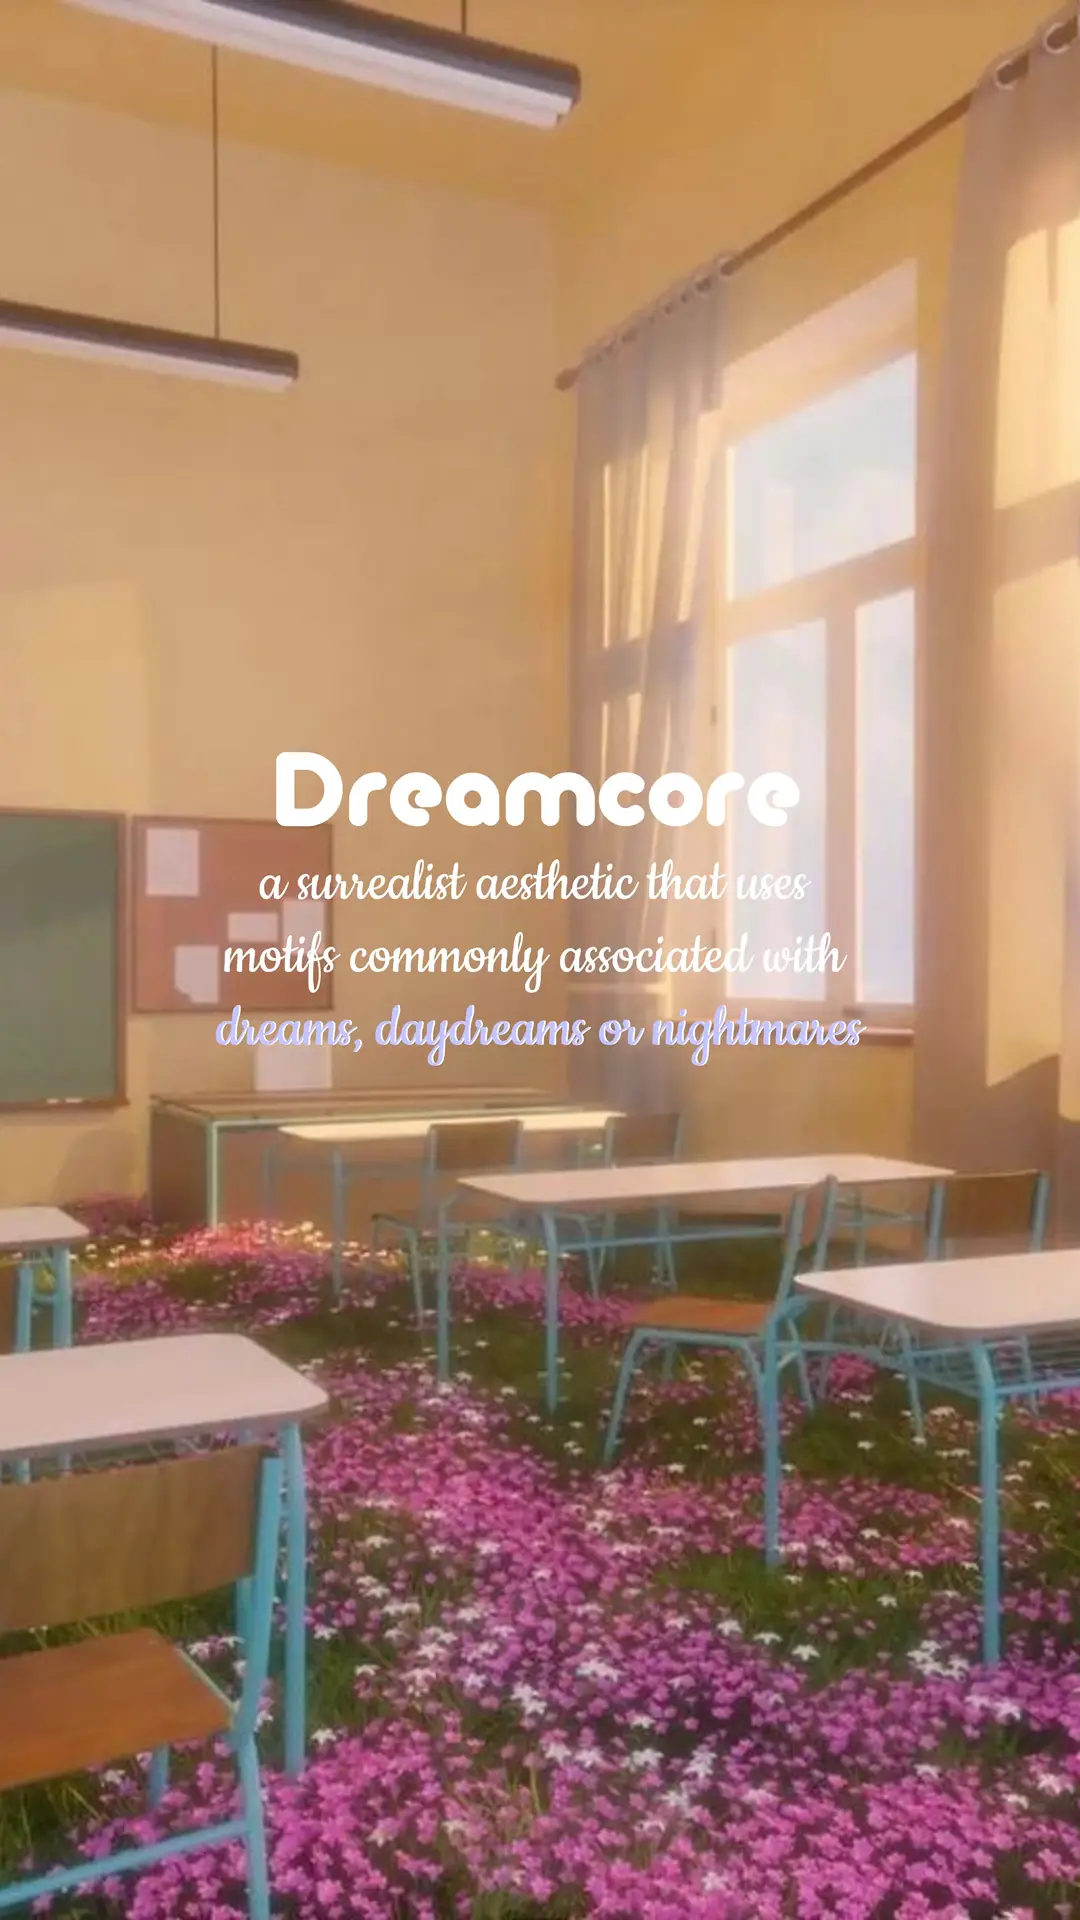 What is the Dreamcore Aesthetic?